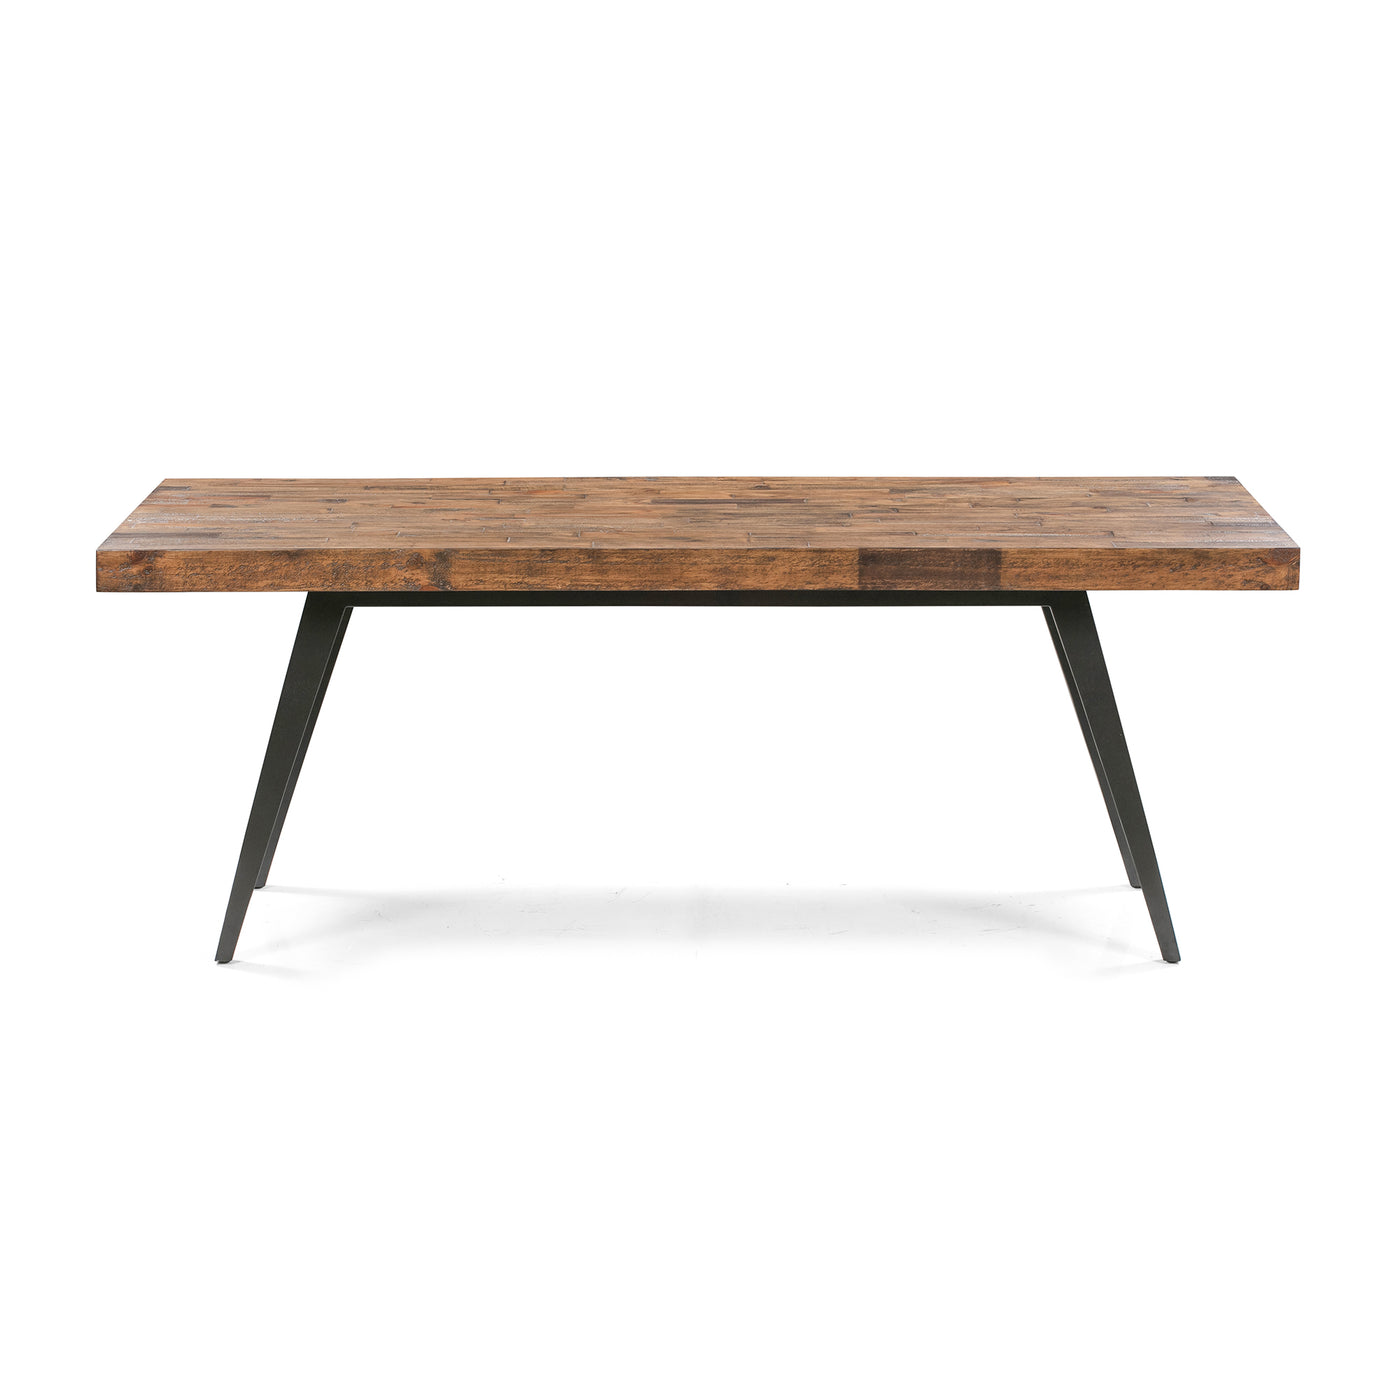 Dixon 8-Seat Dining Table in Natural Finish